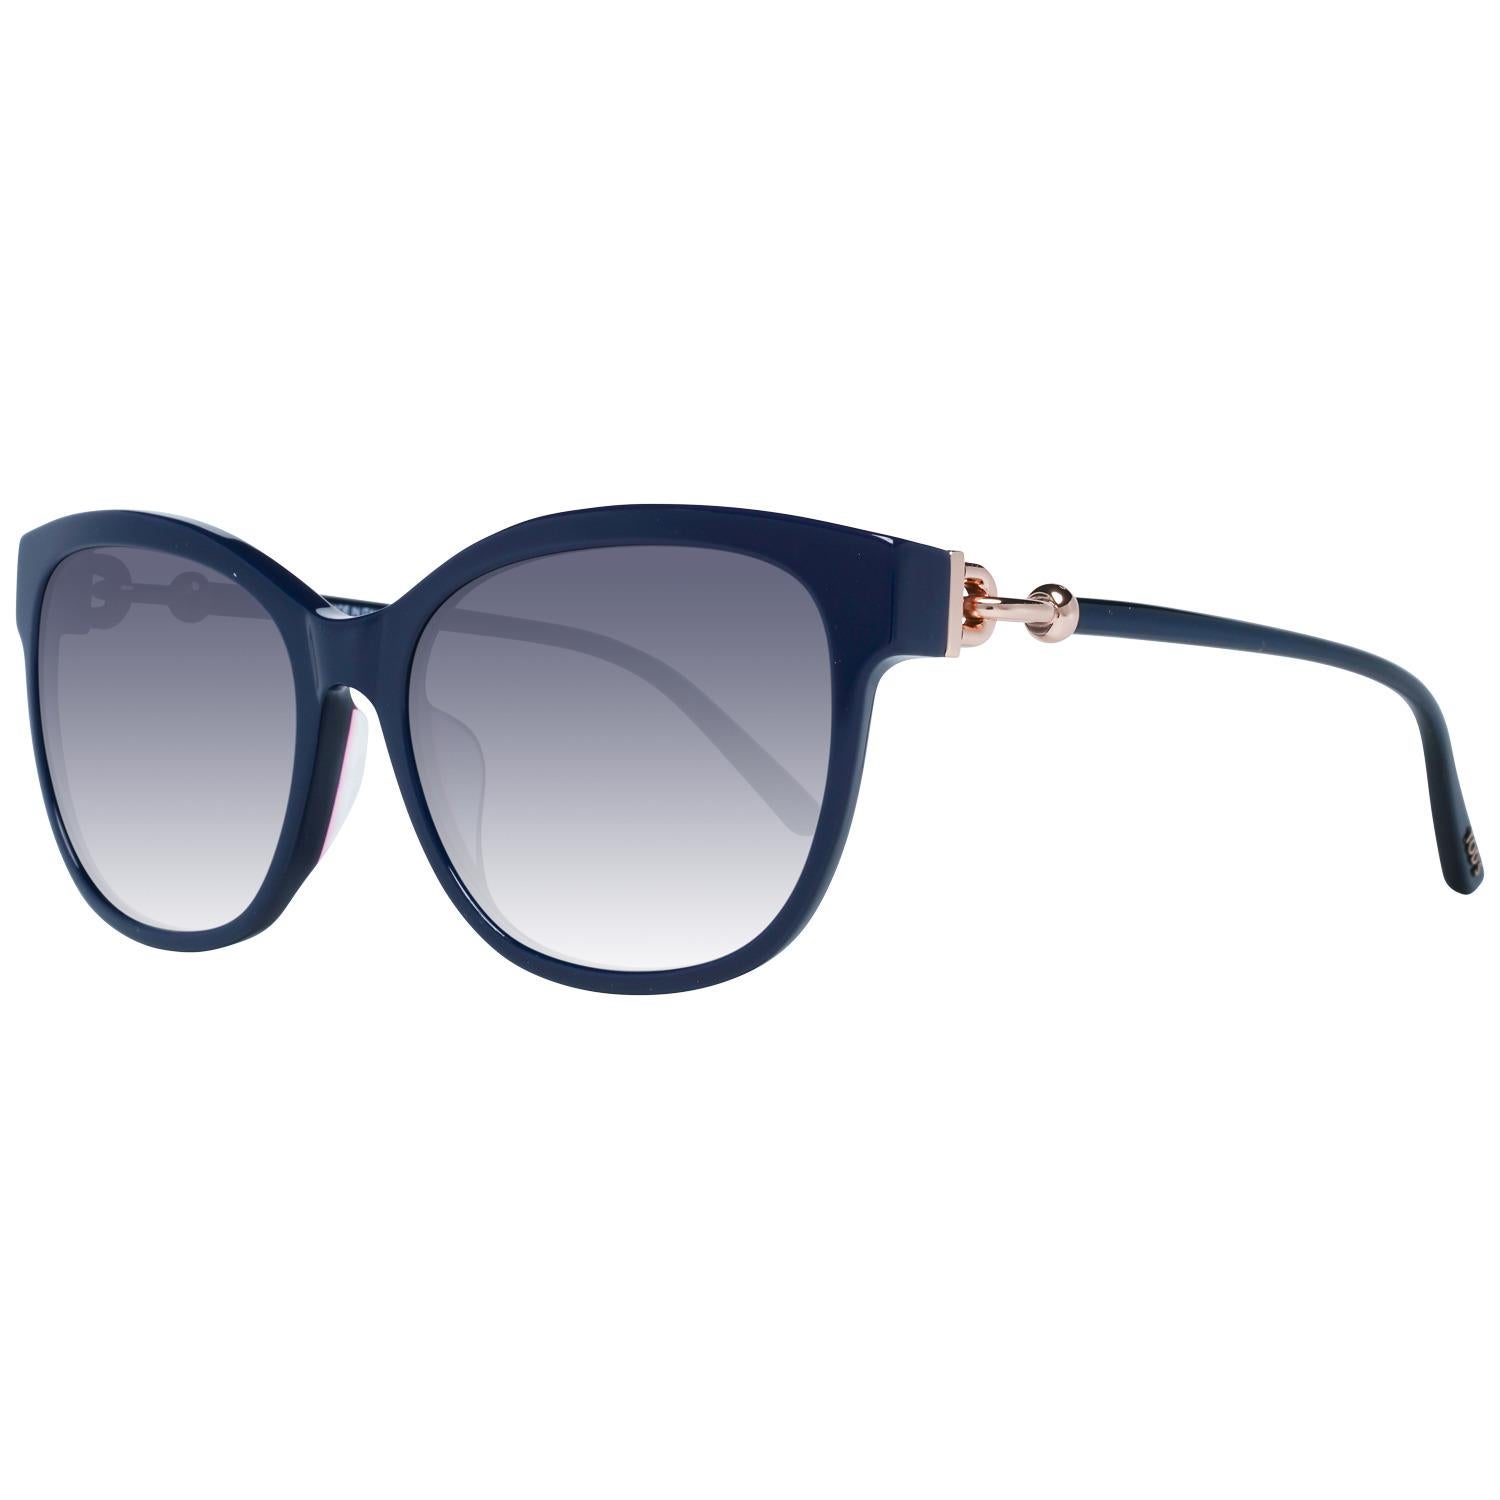 Details

MATERIAL: Acetate

COLOR: Blue

MODEL: TO0153-F 6092B

GENDER: Women

COUNTRY OF MANUFACTURE: Italy

TYPE: Sunglasses

ORIGINAL CASE?: Yes

STYLE: Oval

OCCASION: Casual

FEATURES: Lightweight

LENS COLOR: Brown

LENS TECHNOLOGY: